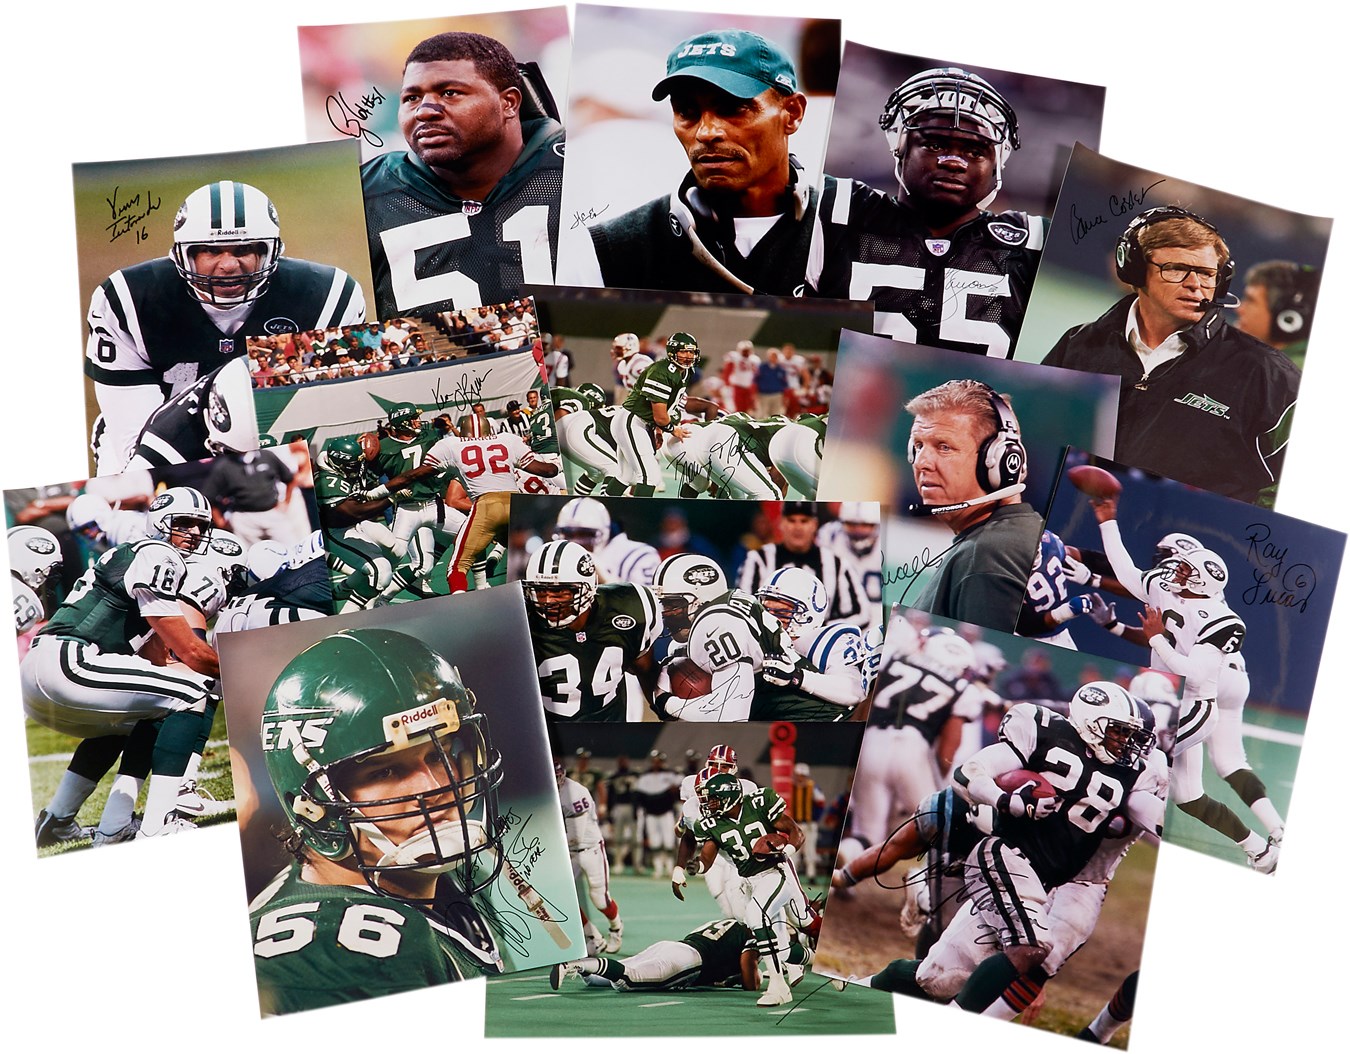 - 1980s-90s New York Jets Signed 16x20” In Person Signed Photographs from VIP Photographer Richard Brightly (14)